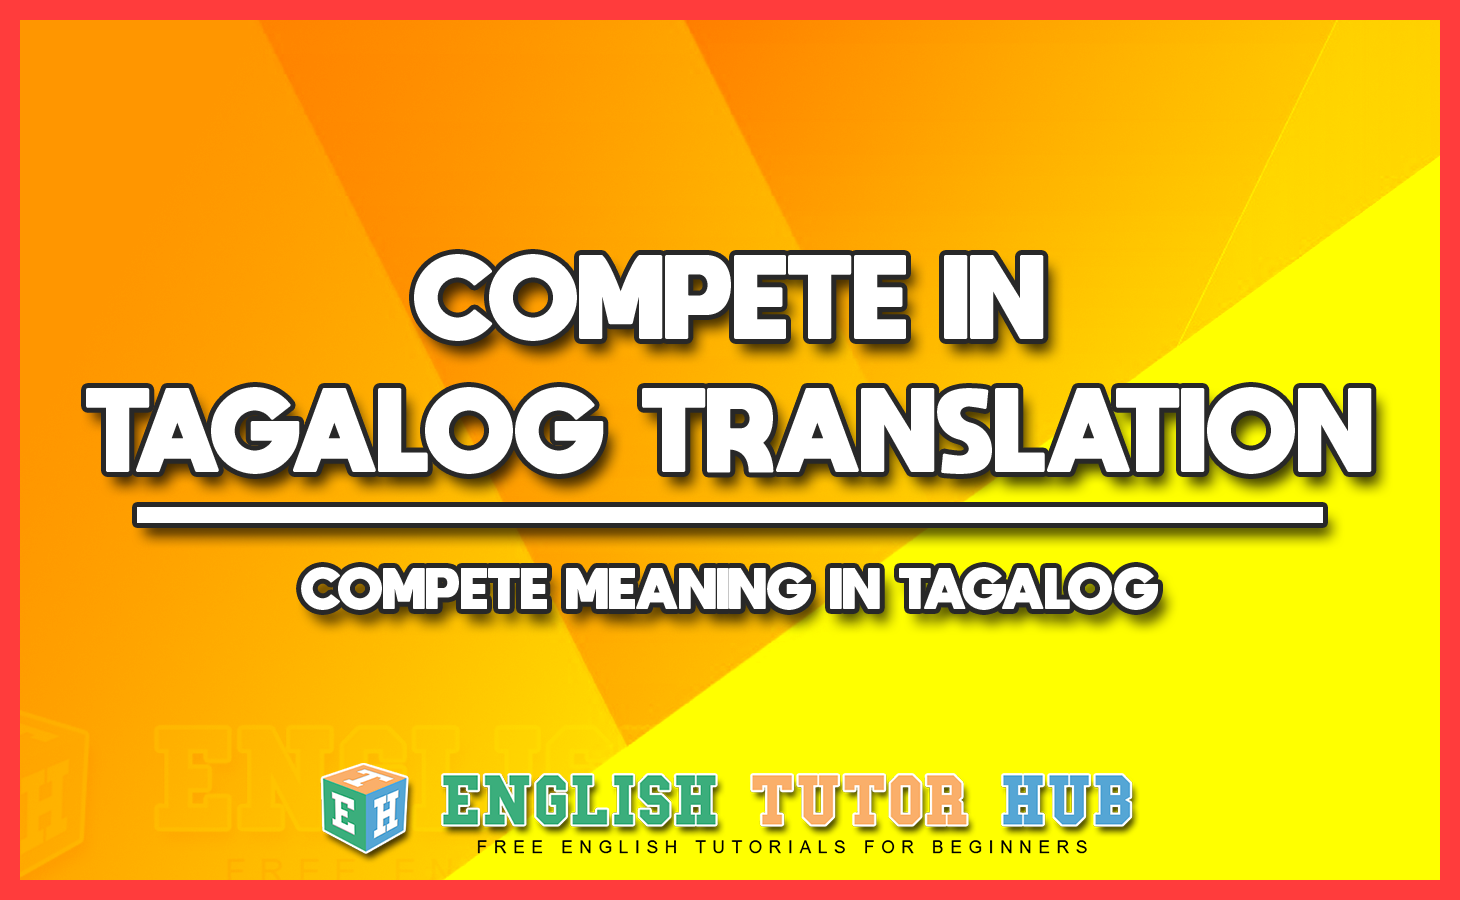 COMPETE IN TAGALOG TRANSLATION - COMPETE MEANING IN TAGALOG